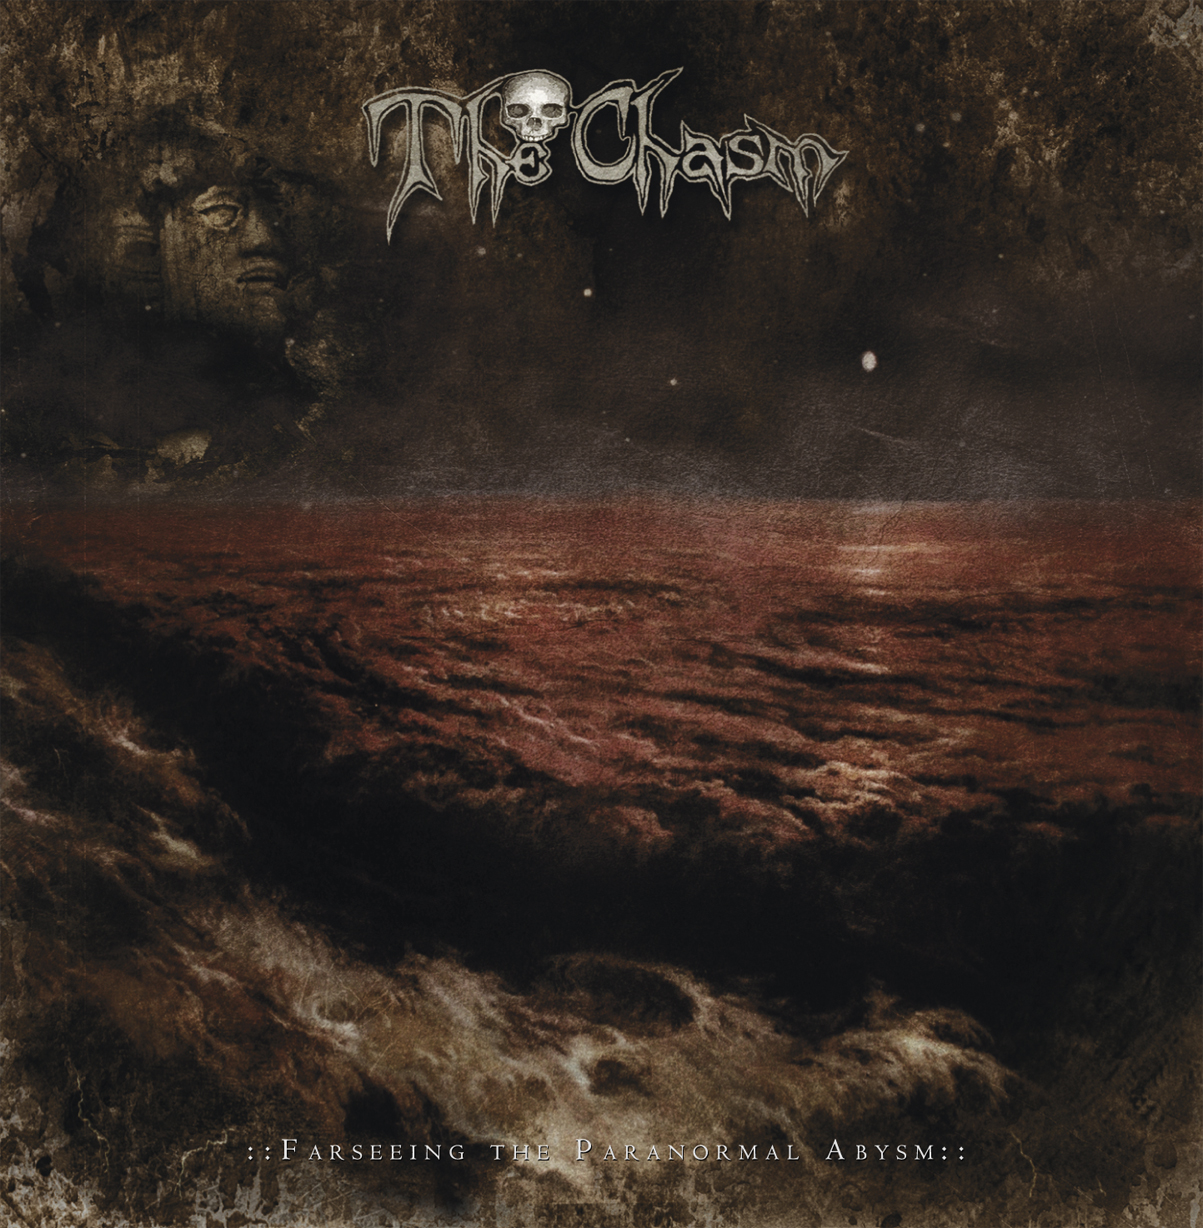 The Chasm – Farseeing the Paranormal Abysm